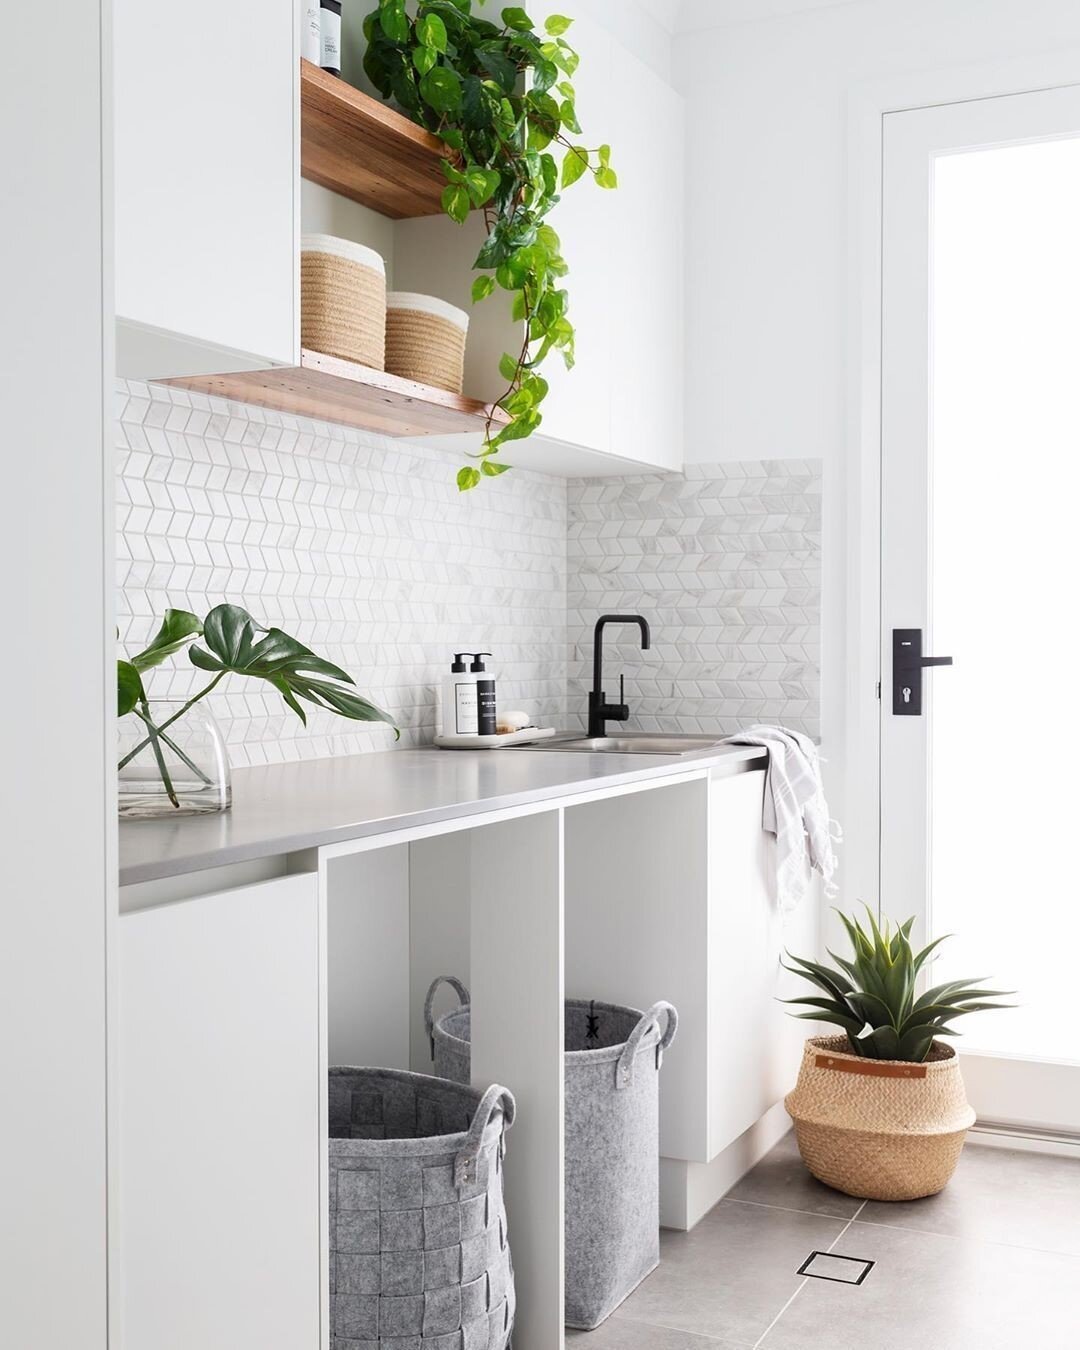 This is a bright and beautiful space filled with greenery and lush textured tiles. ⠀
Question: Will you keep your cabinetry the same throughout your next reno, or go for a two-toned look? ⠀
Tag us in your post if you use our doors, we're dying to see